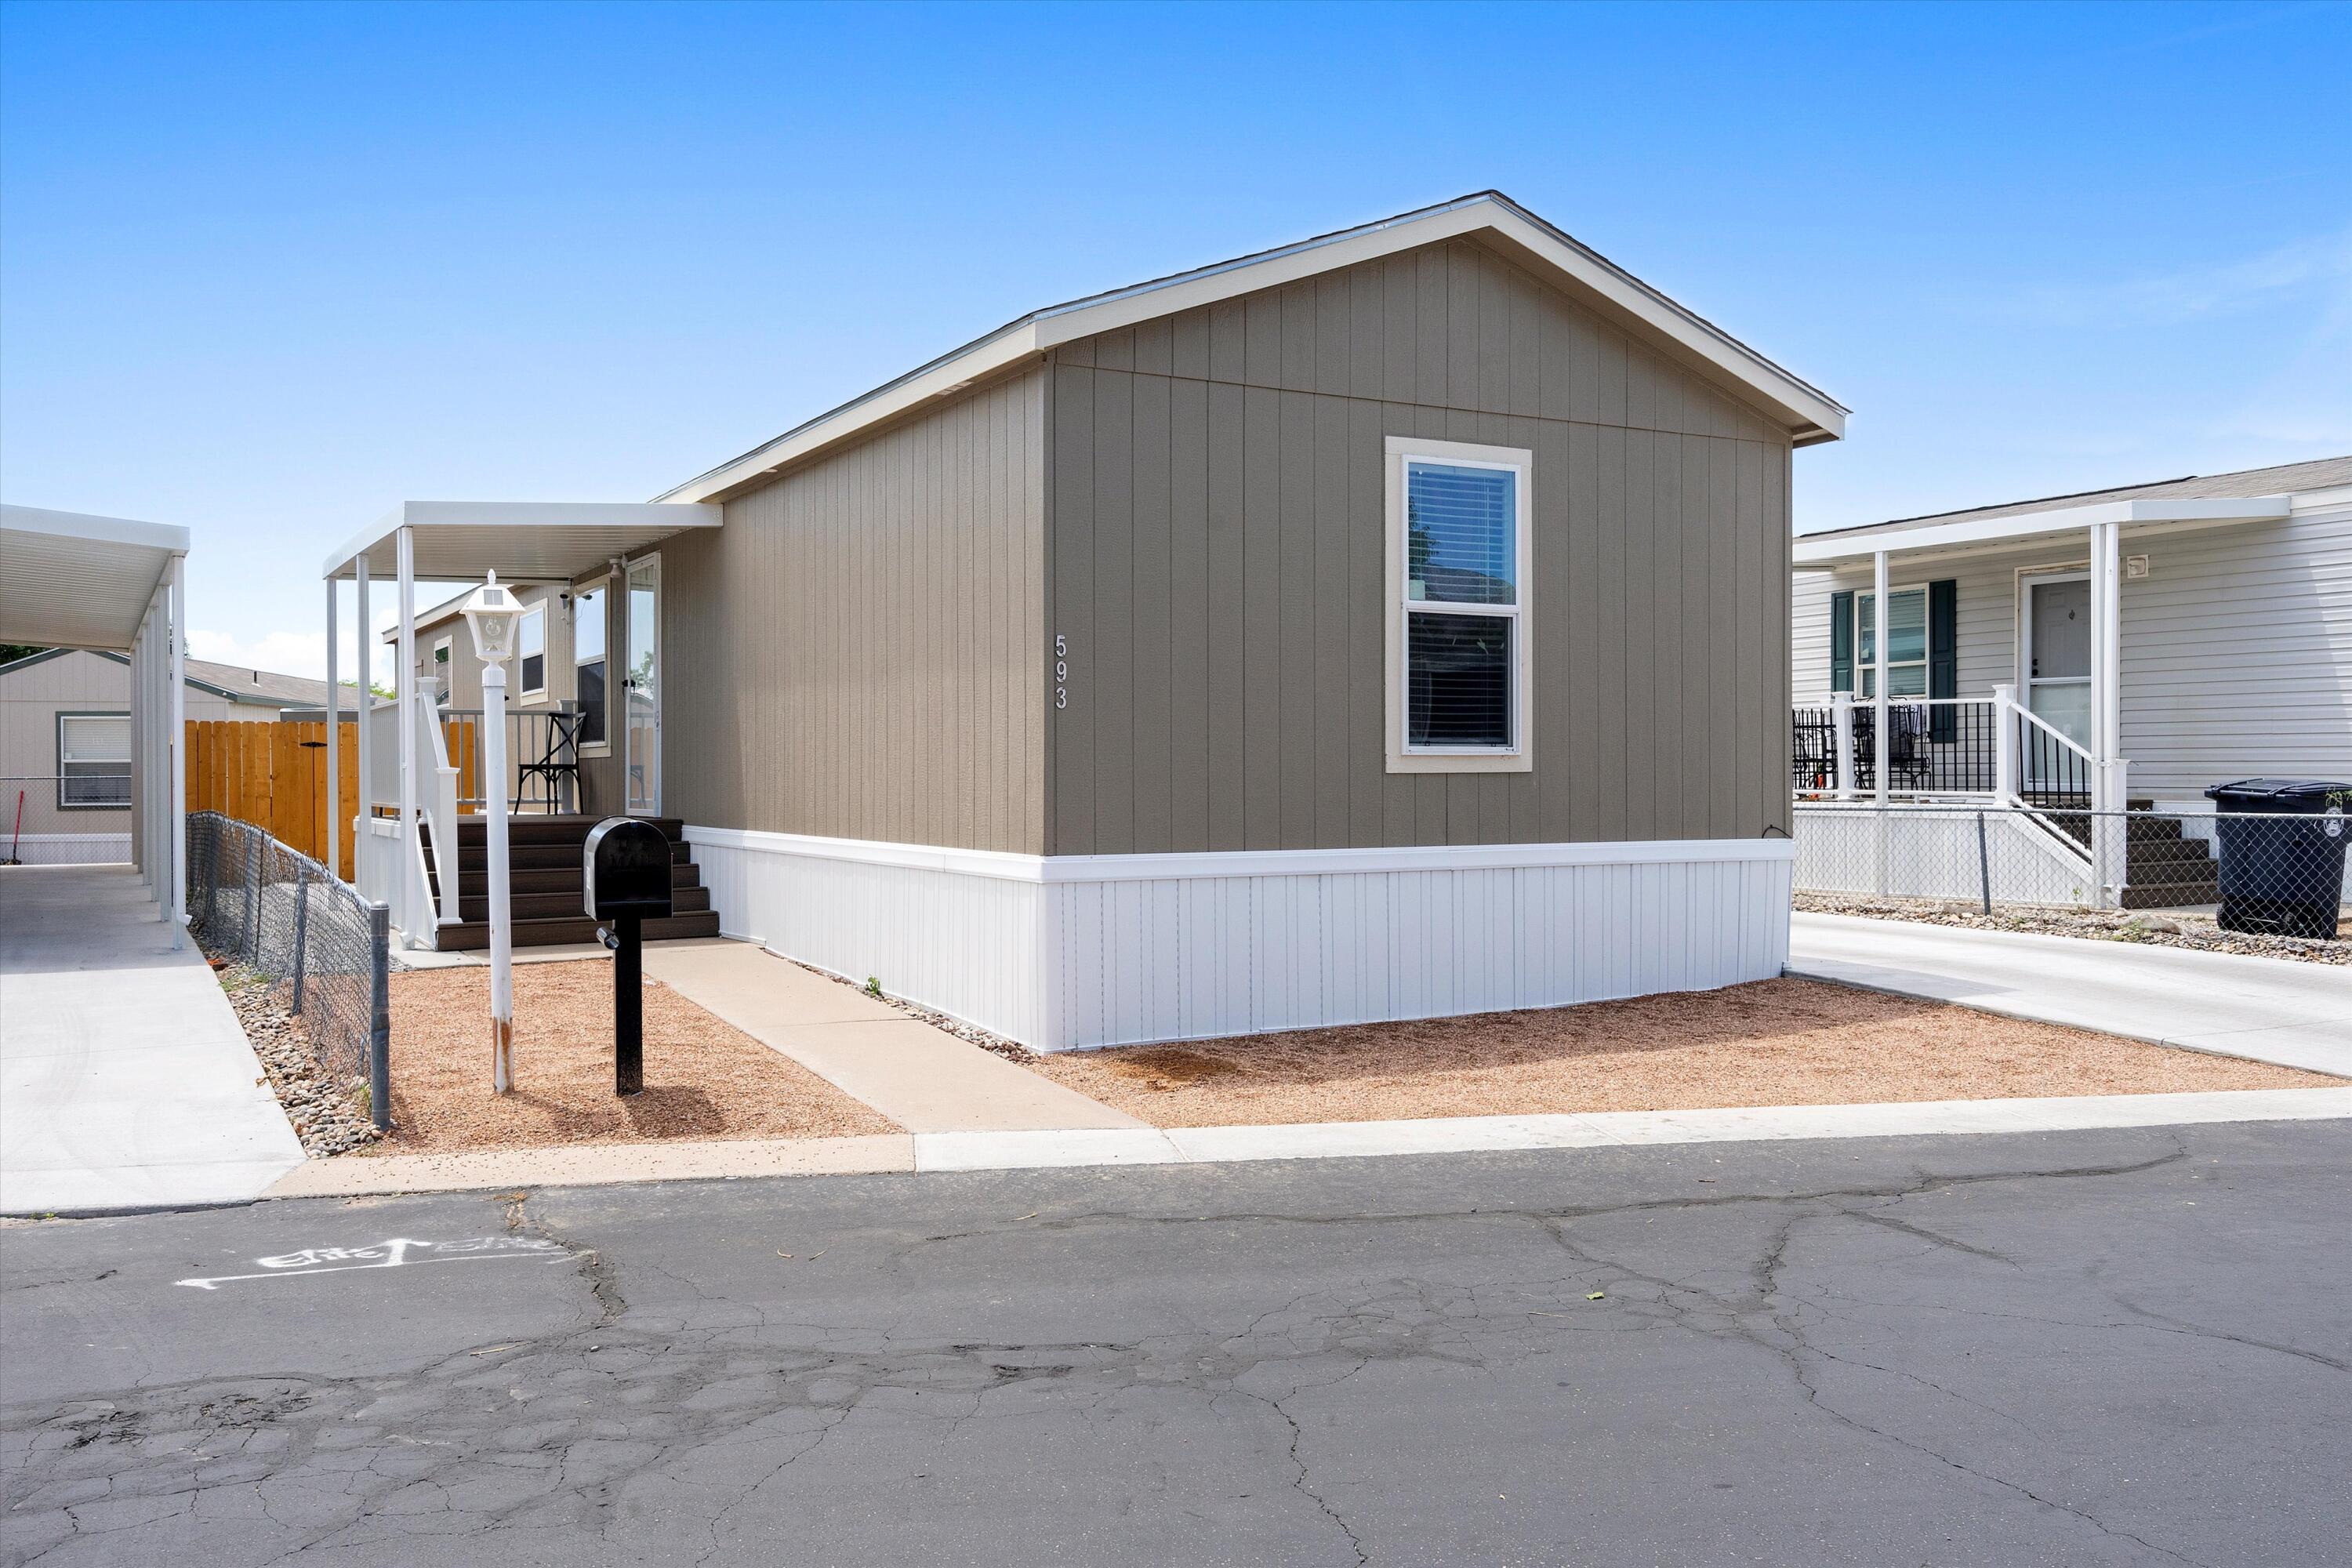 Welcome to your NEW home in the Four Hills community! This beautiful mobile home offers 3 bedrooms, 2 bathrooms, and a perfect blend of comfort and space. As a resident, you'll have access to fantastic amenities like a private clubhouse, playground, tennis courts, and a refreshing pool - all included in the land lease. Enjoy the luxury of a 2023 model home with refrigerated air for ultimate comfort. Don't miss out! Contact us today to schedule a viewing and start living your best life in Four Hills!